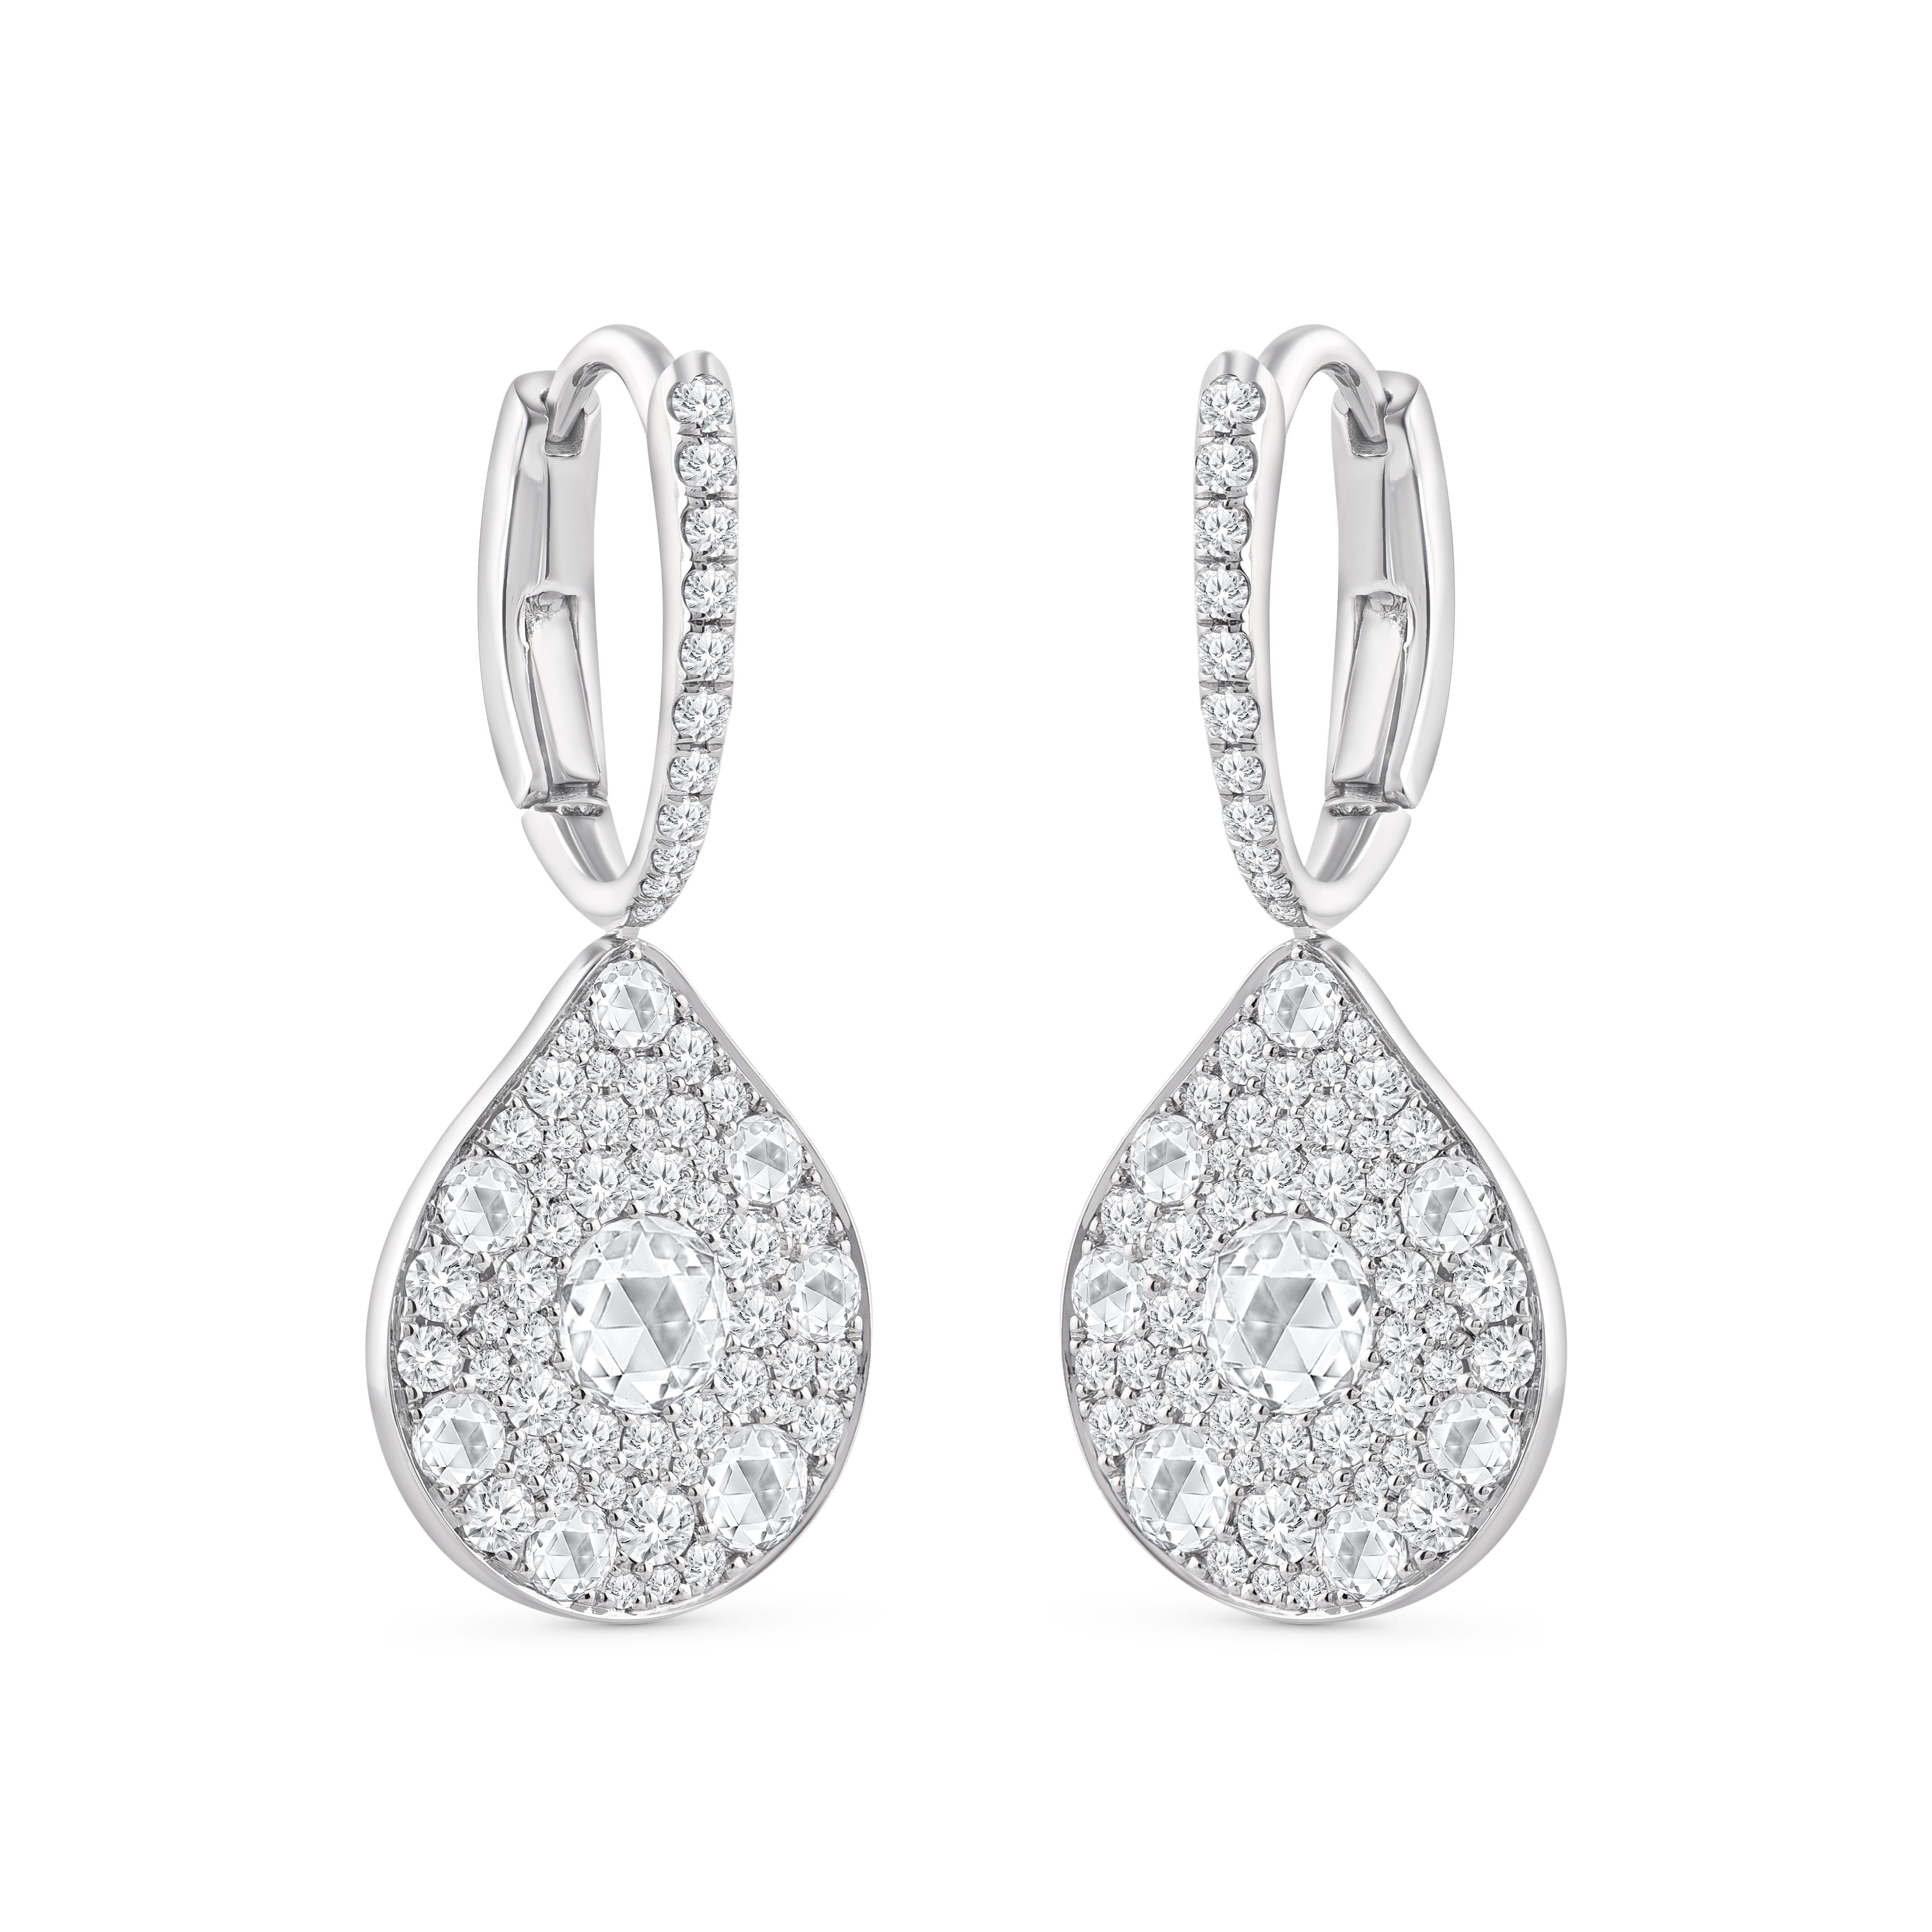 Inspired by the JOY of experiencing a gushing waterfall, these exquisite and elegant drop earrings from the Cascade Collection are studded with brilliant cut and rose cut diamonds dripping delicately.

Beautifully designed, these earrings will